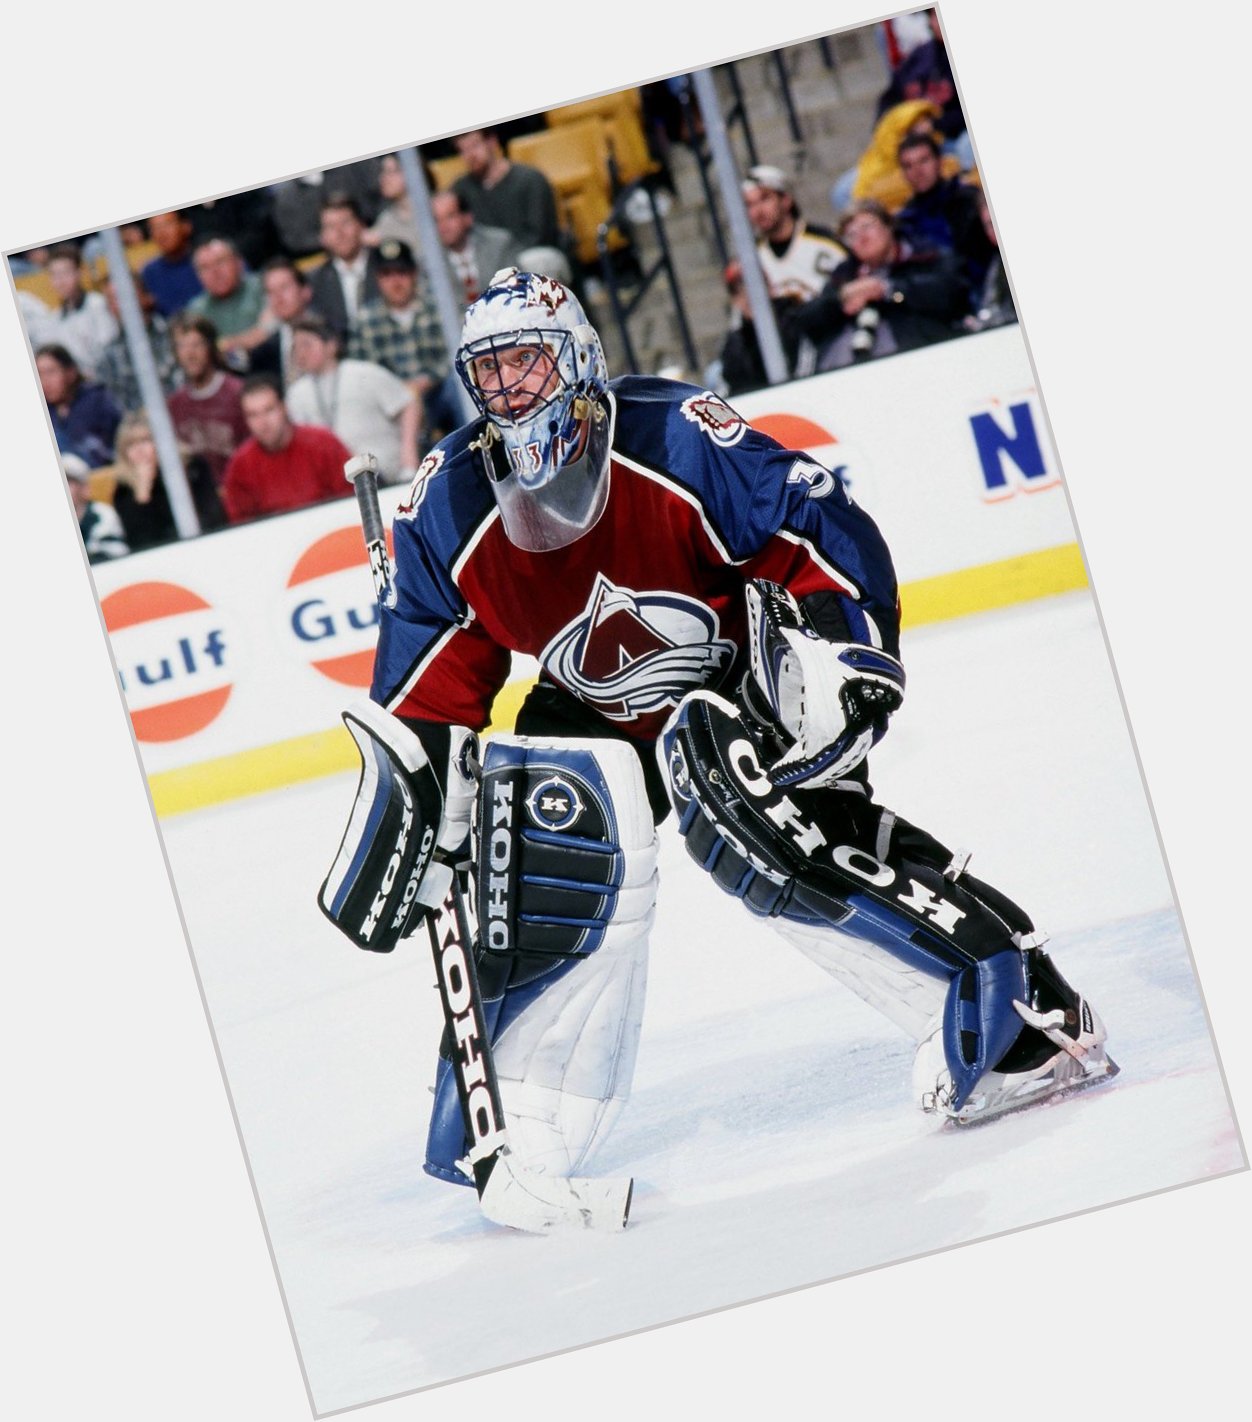 A legend in the crease.

Wishing a very happy birthday to Patrick Roy! 